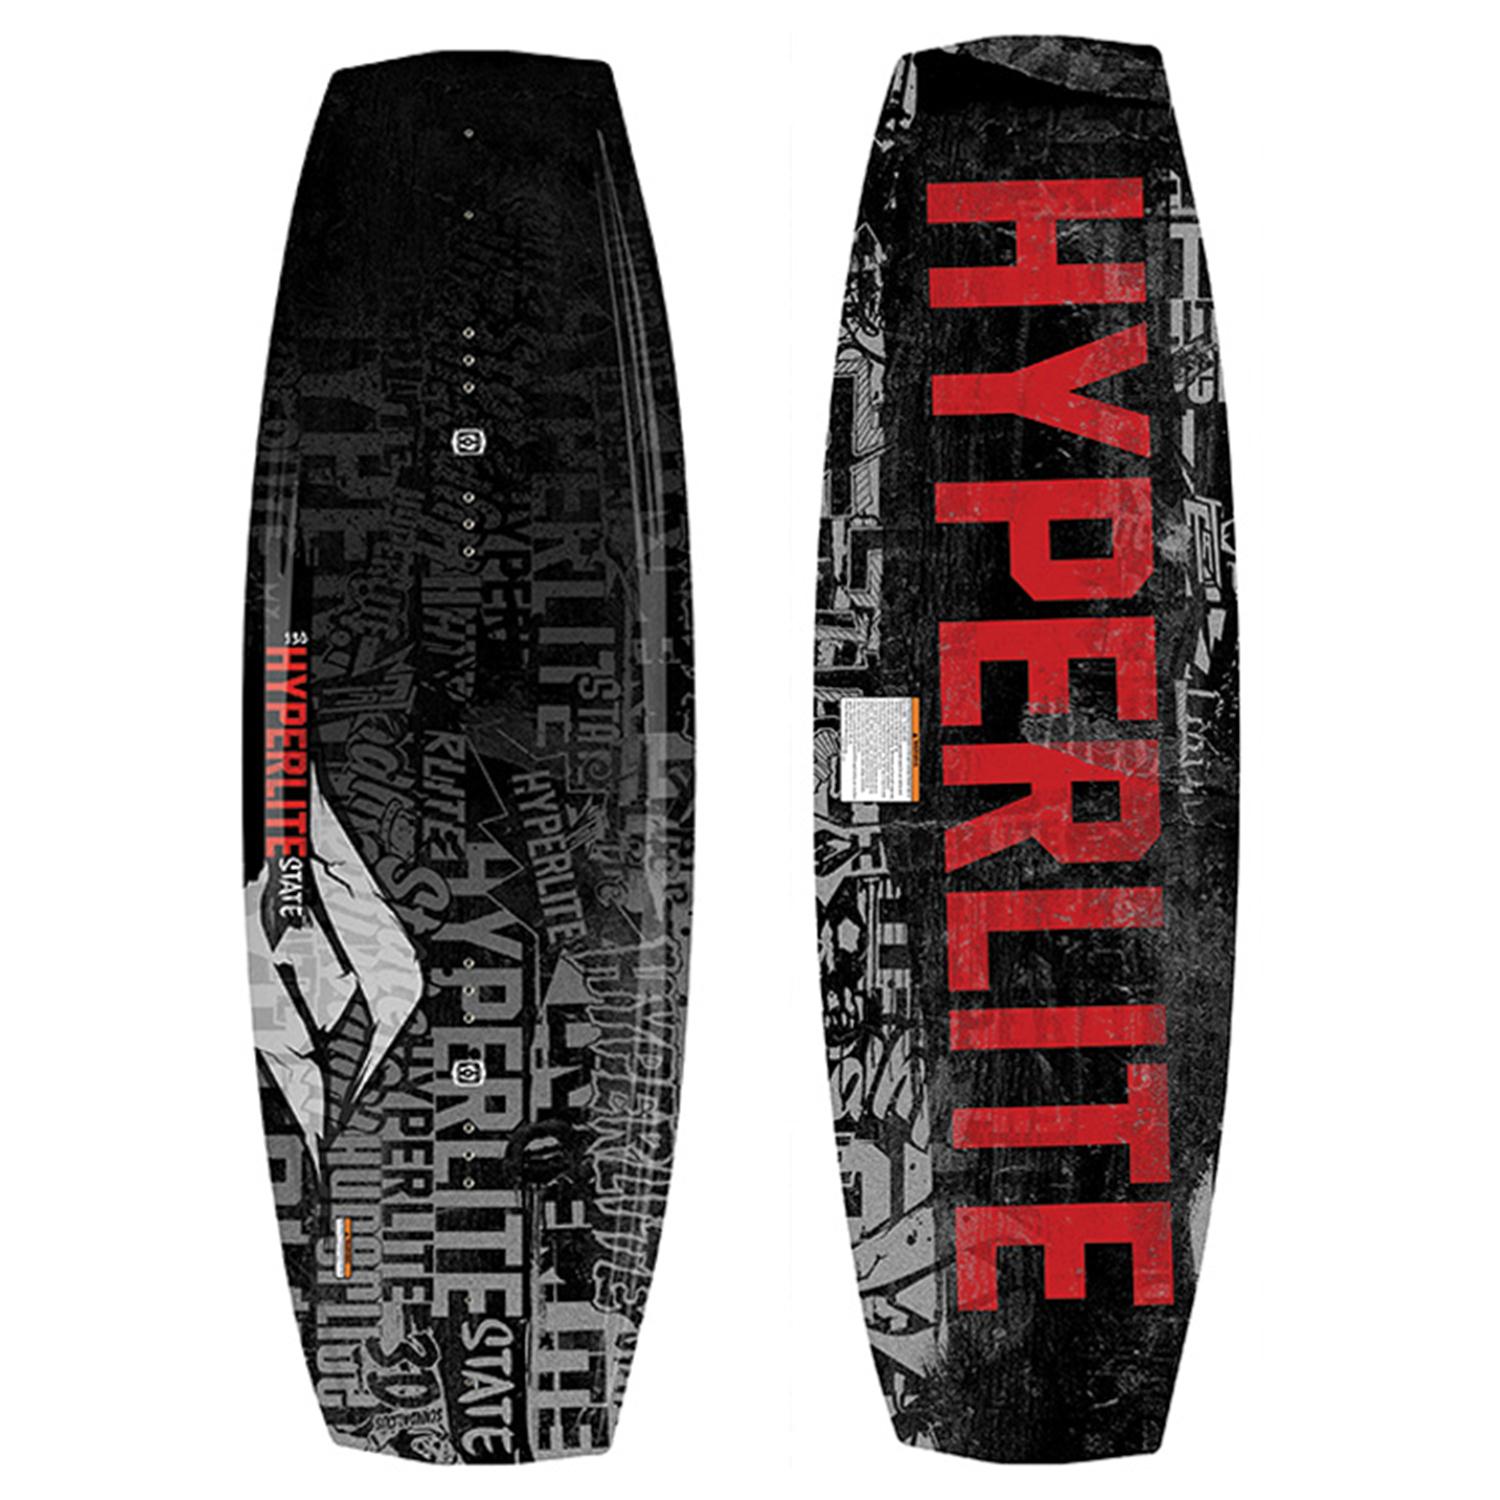 Hyperlite State Wakeboard + Remix Bindings 2013 | evo outlet